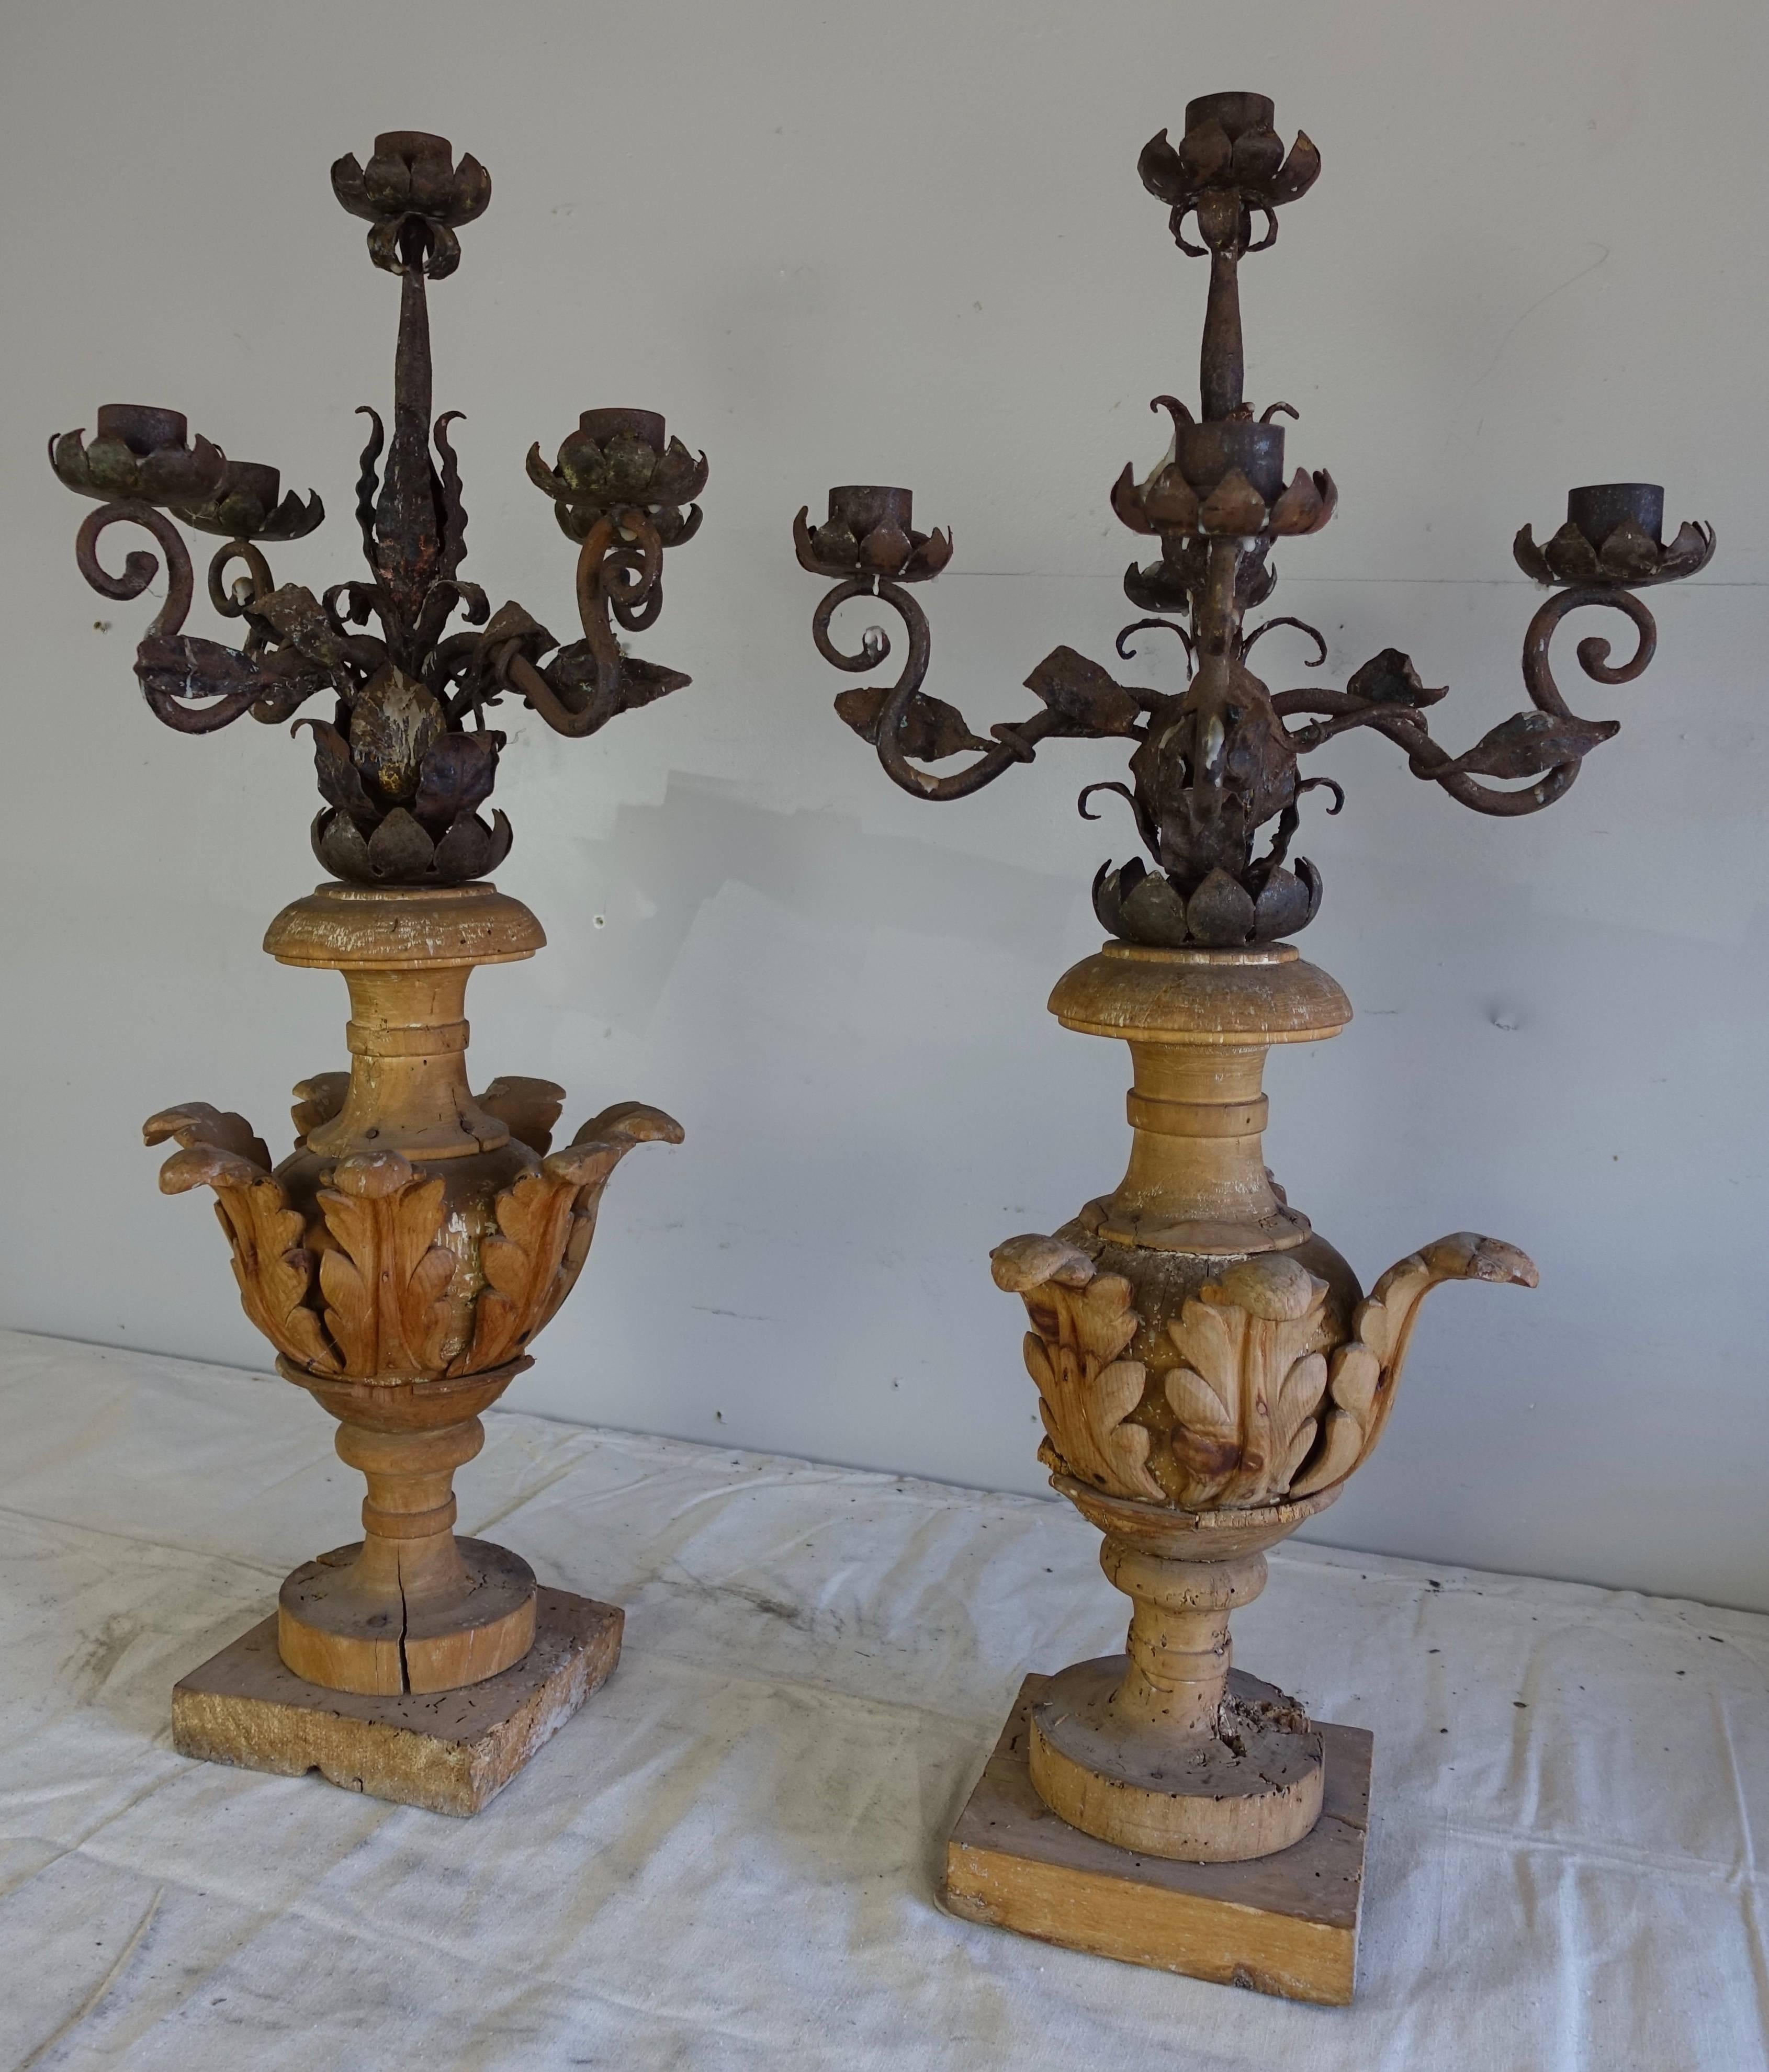 Pair of 19th century five-light Italian carved walnut and hand-wrought iron candelabra. The wood bases are composed of an urn of carved acanthus leaves that are filled with a bouquet of hand-wrought iron flower candleholders. They can simply be used